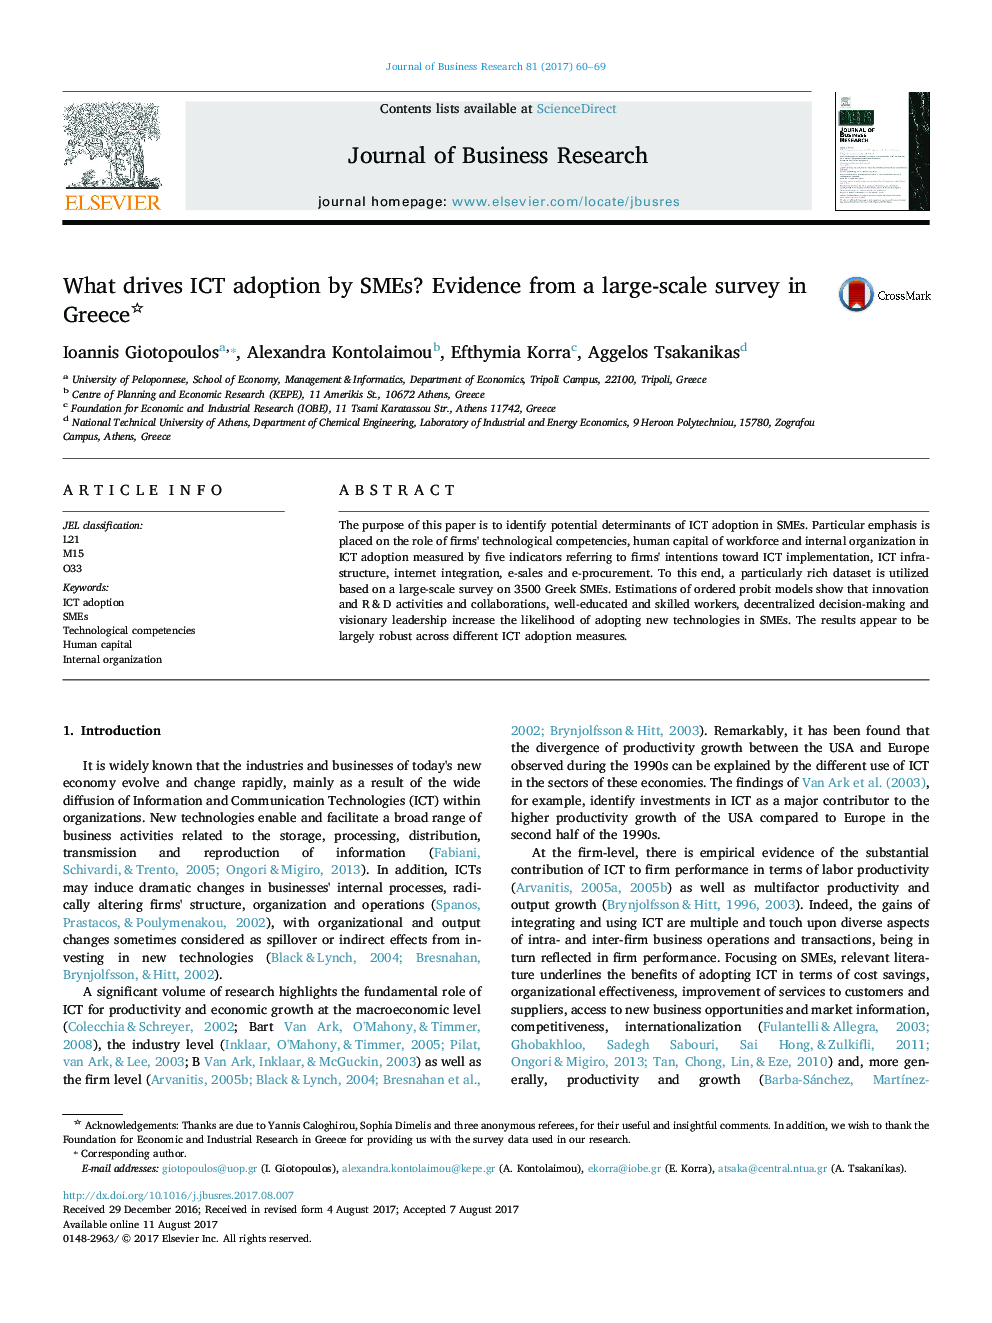 What drives ICT adoption by SMEs? Evidence from a large-scale survey in Greece